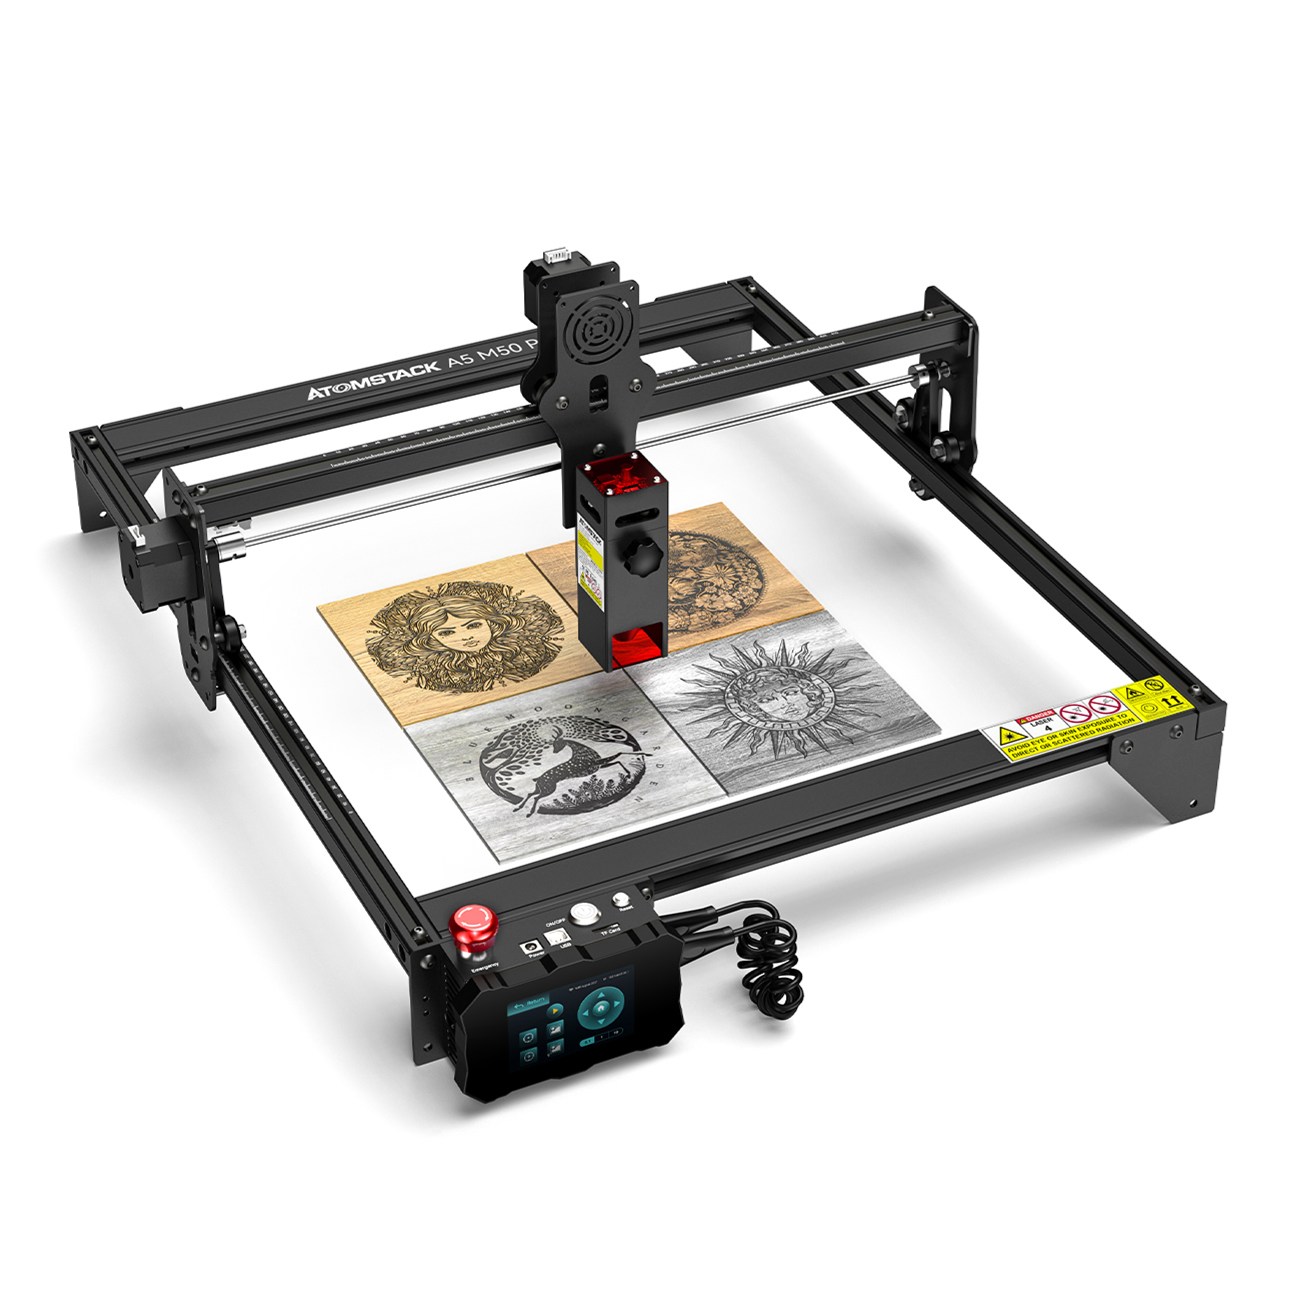 Find ATOMSTACK A5 M50 PRO Dual Laser Laser Engraving Cutting Machine Laser Engraver 5 5W Output Power Fixed Focus 304 Mirror Stainless Steel Engraving DIY Laser Marking for Metal Wood Leather Vinyl Support Offline Engraving for Sale on Gipsybee.com with cryptocurrencies